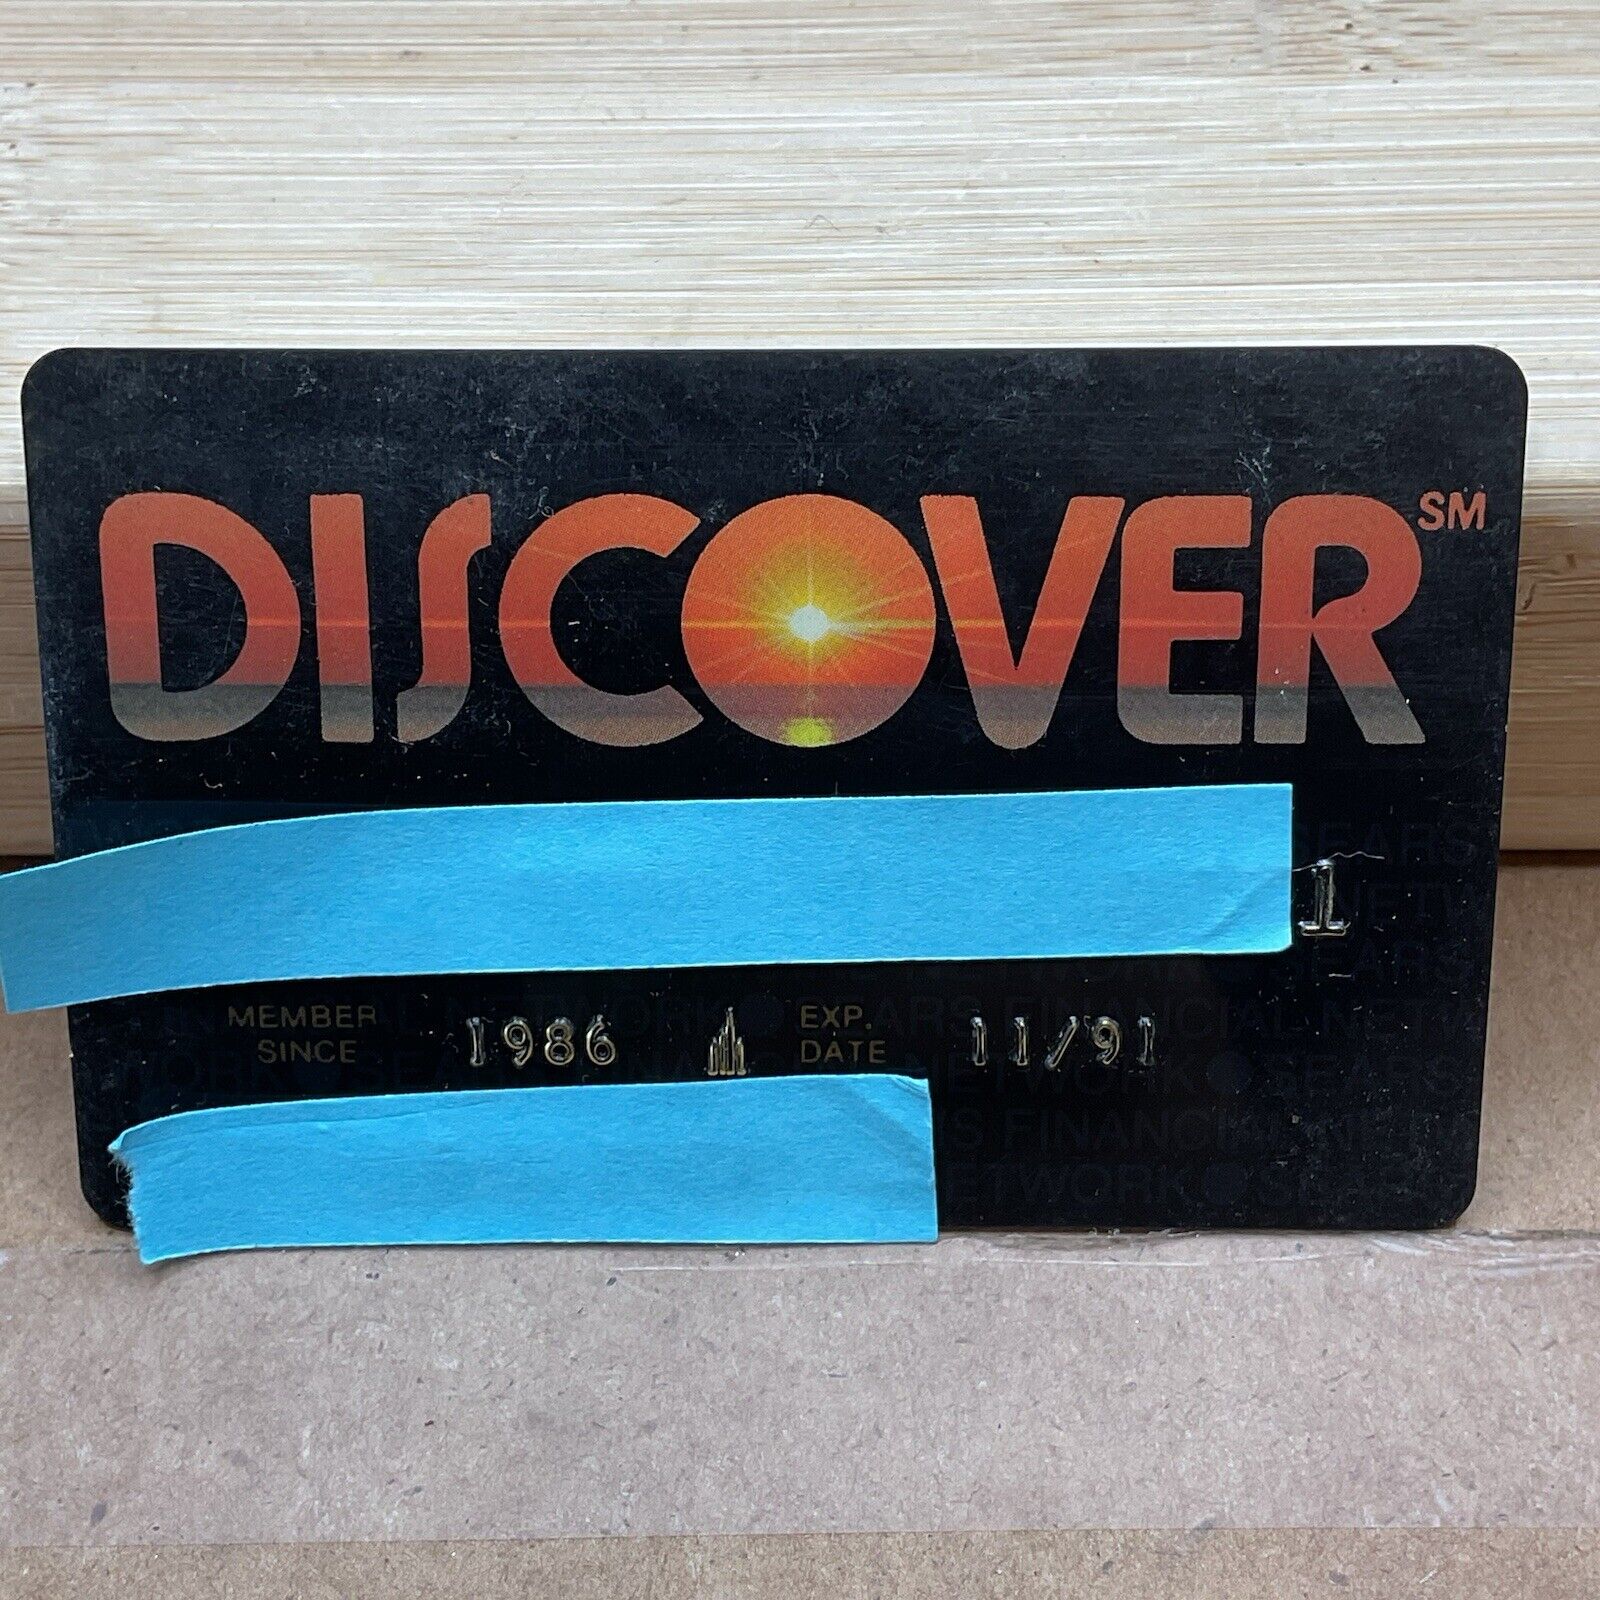 Vintage Discover Credit Card -expired 1991 - S117